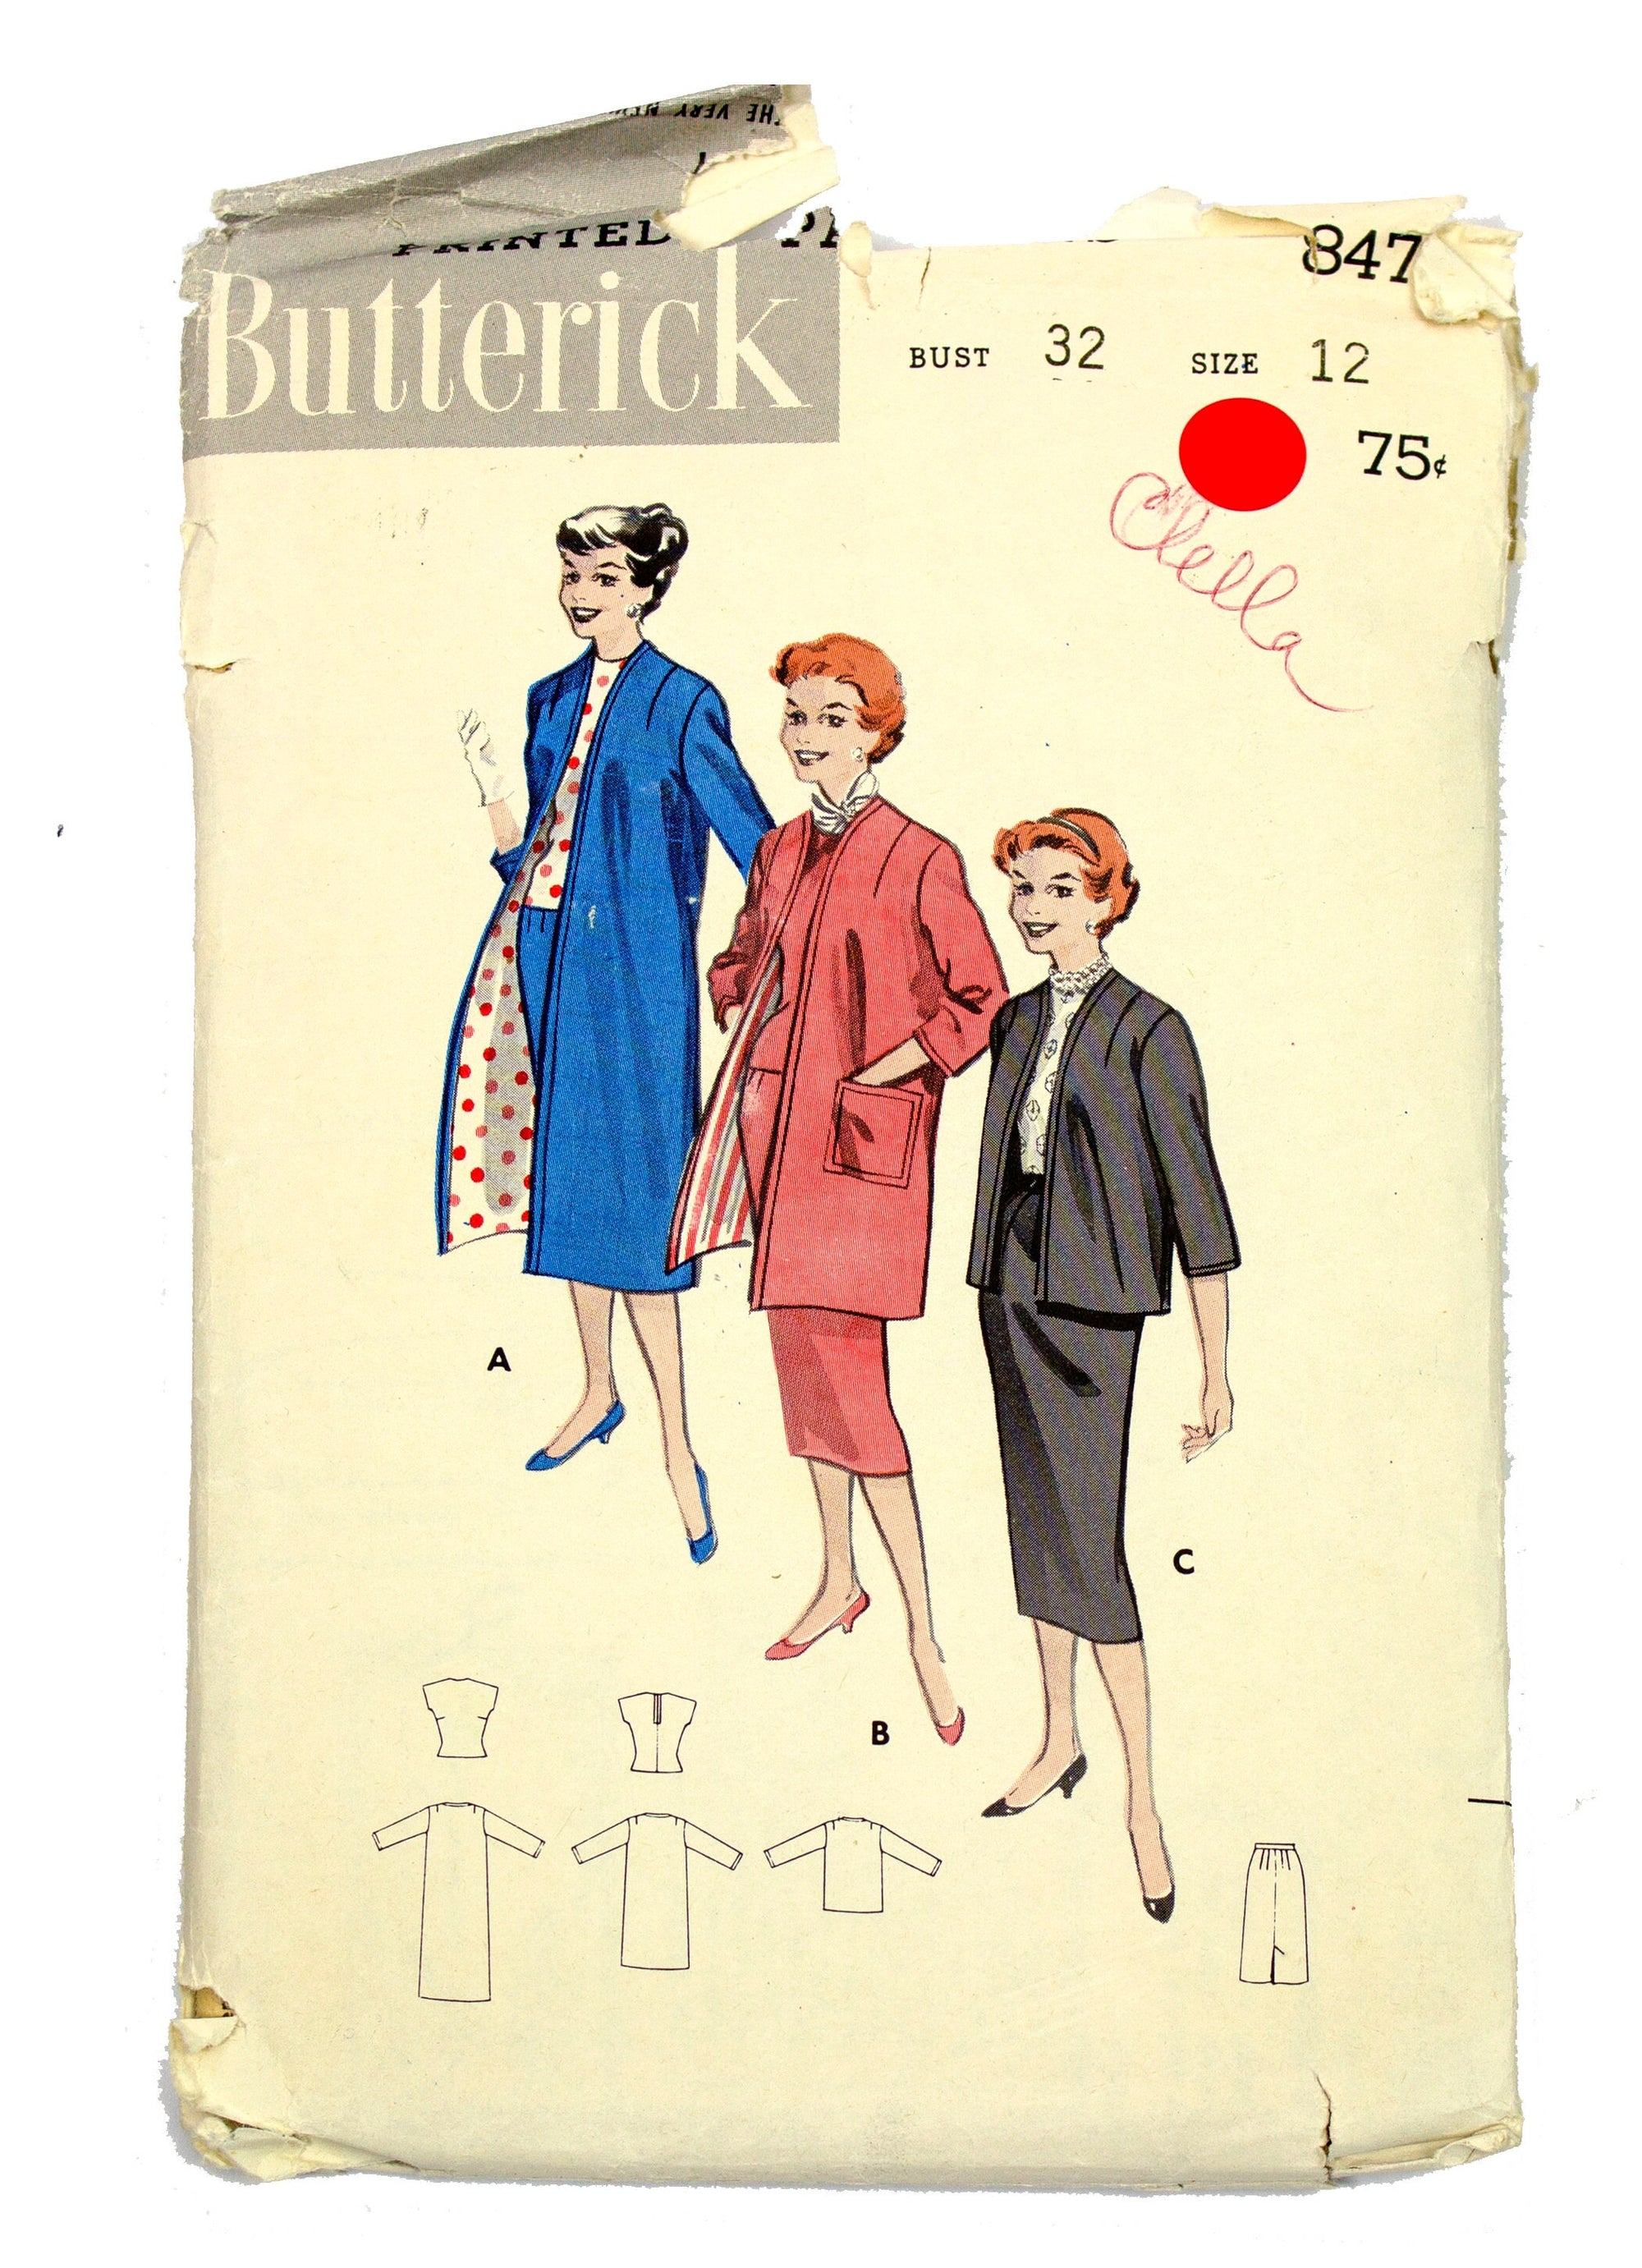 Butterick 847 Women's Coordinated Separates Three Outfits - Size 12 Bust 32